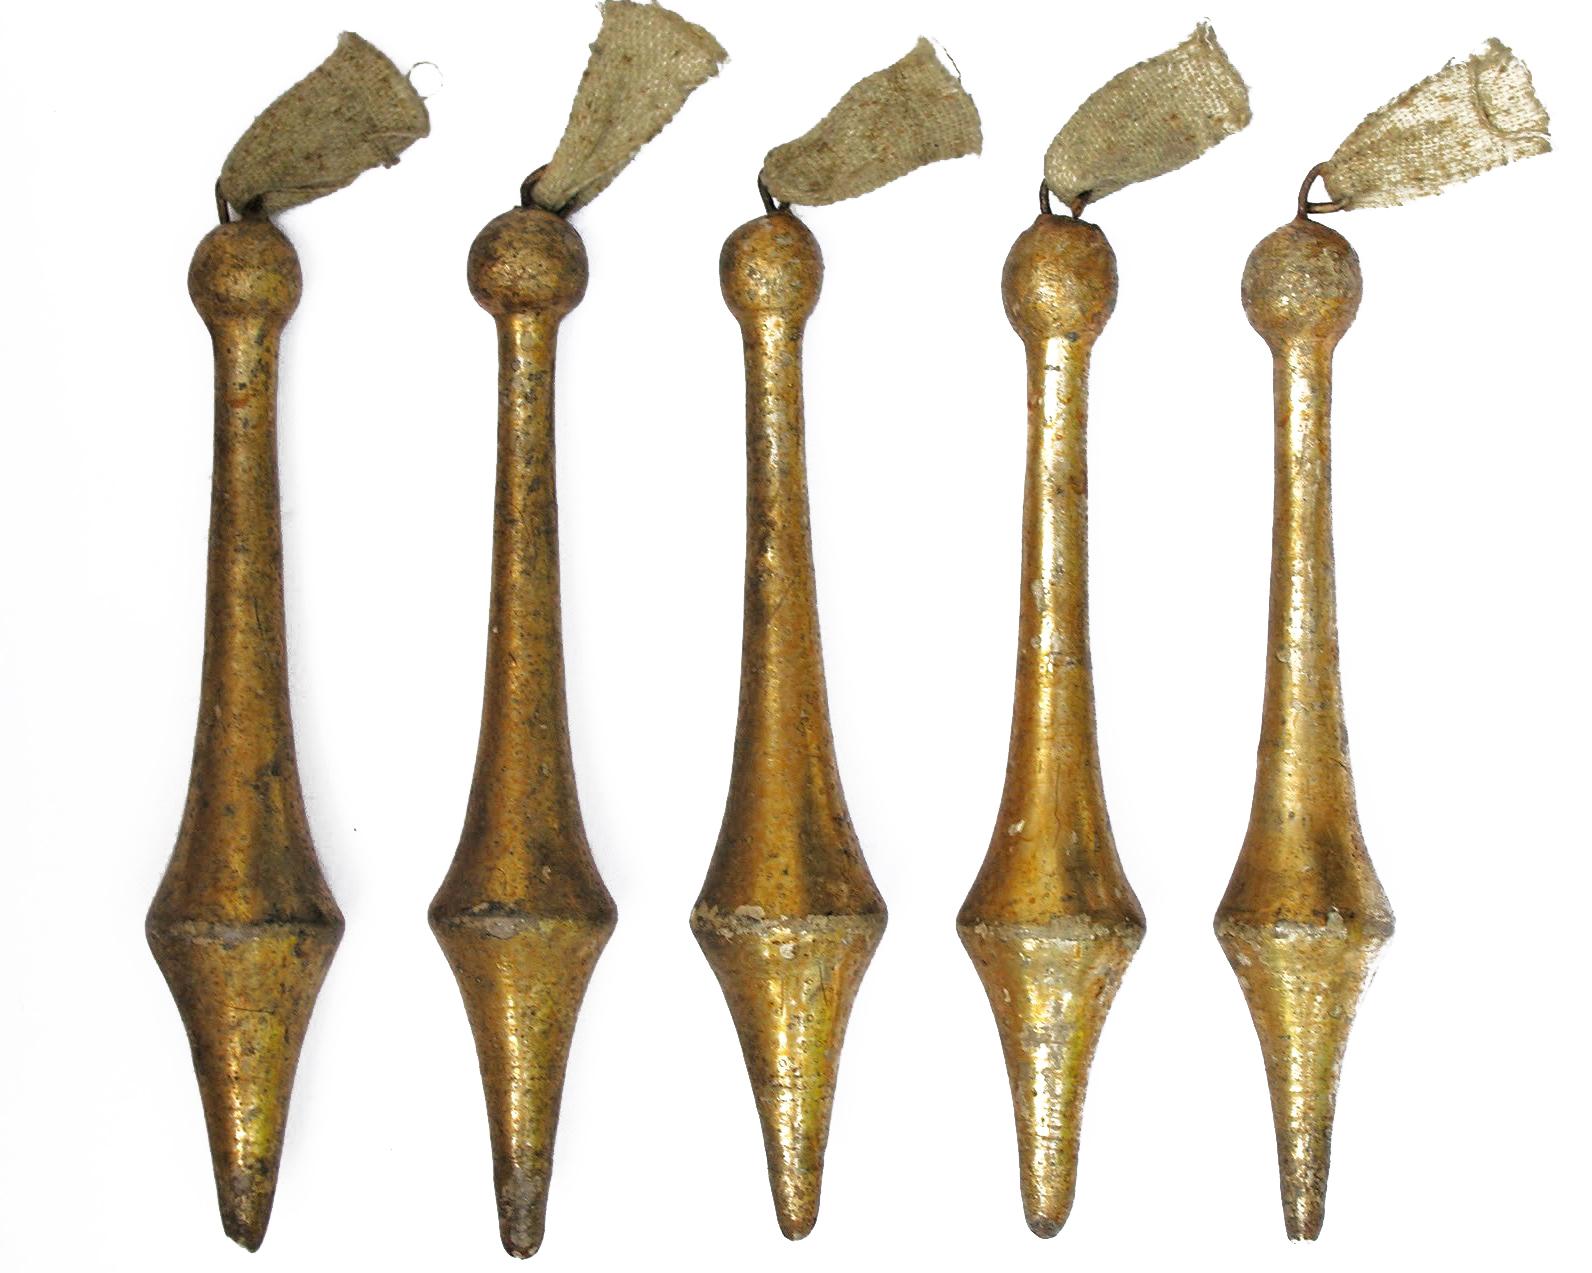 Rare 18th century Italian gold leaf tassel ornaments - 3 sets of five of the pointed tassels, 2 sets of the spiral carved tassels, one set of the tear drop tassels, and one set of the large pointed tassels. 7 sets altogether so 35 tassels. 

These